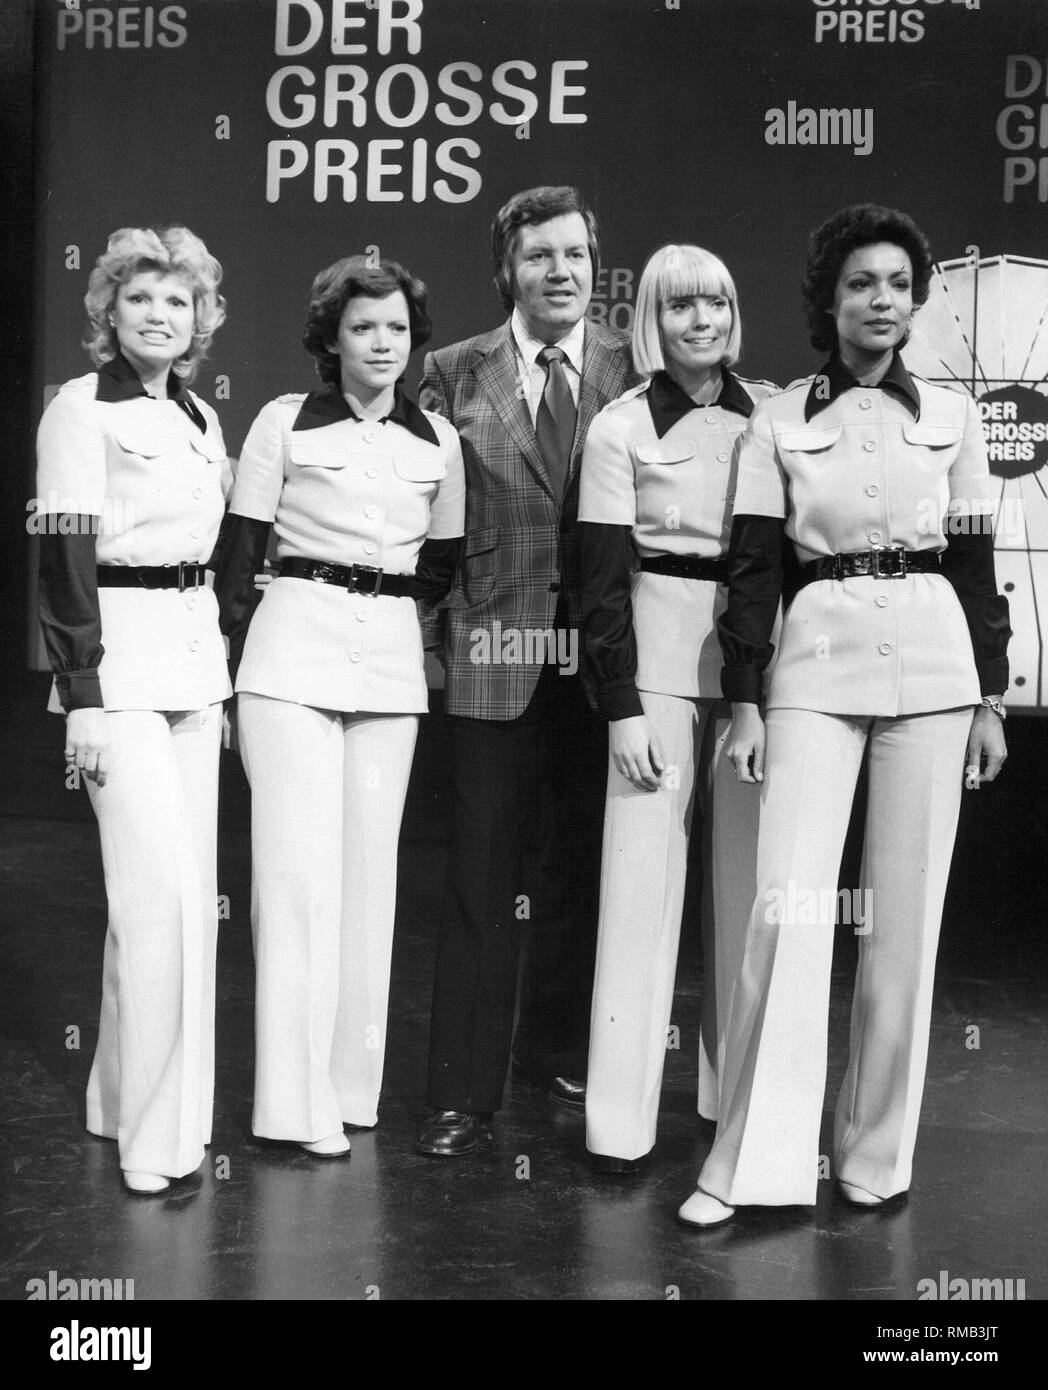 Wim Thoelke (mi.) with his assistants Marianne, Silvia, Beate and Janita  (from left) in the TV show "Der Grosse Preis Stock Photo - Alamy